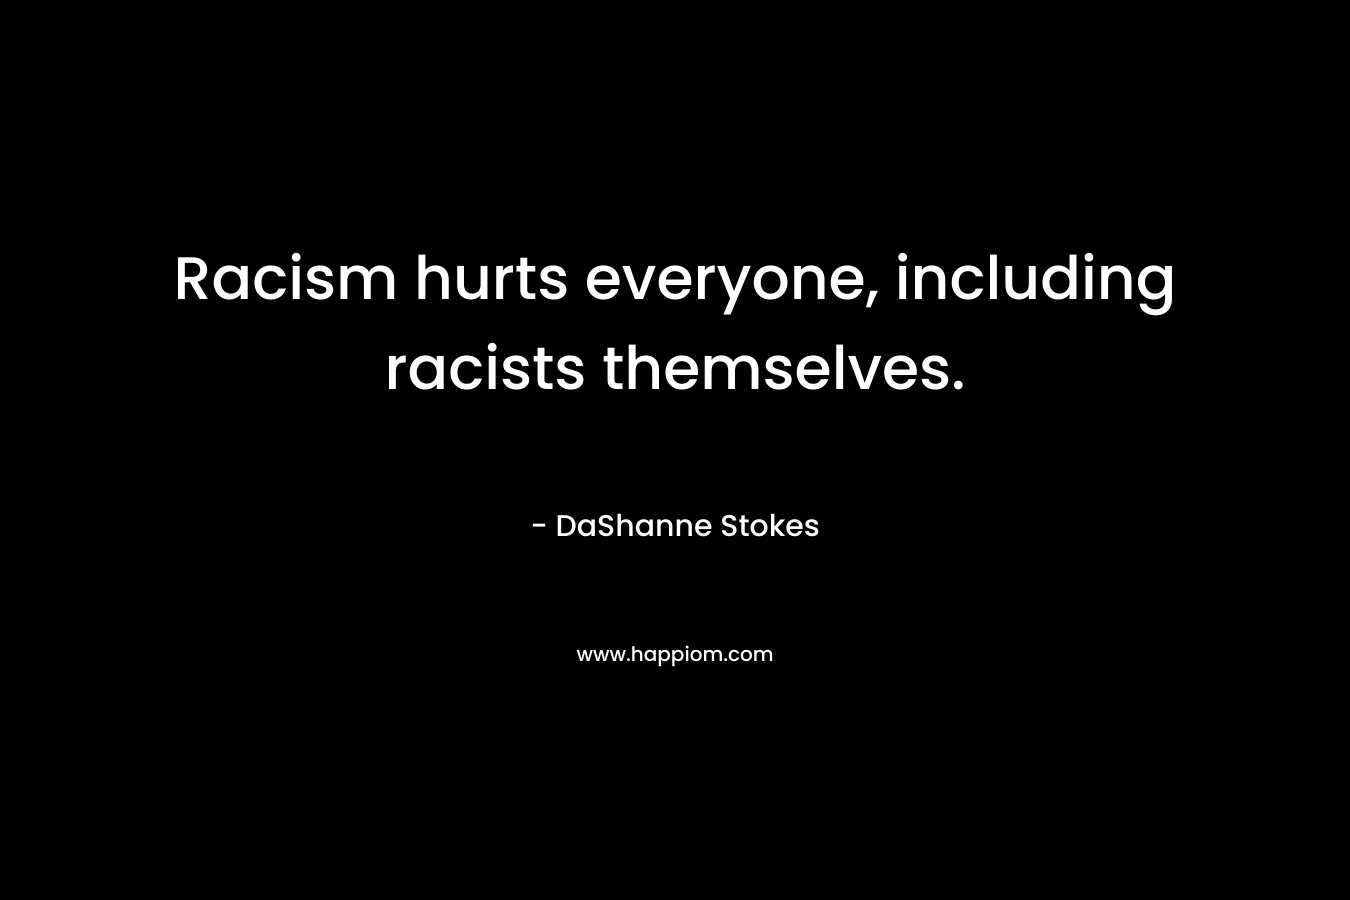 Racism hurts everyone, including racists themselves. – DaShanne Stokes